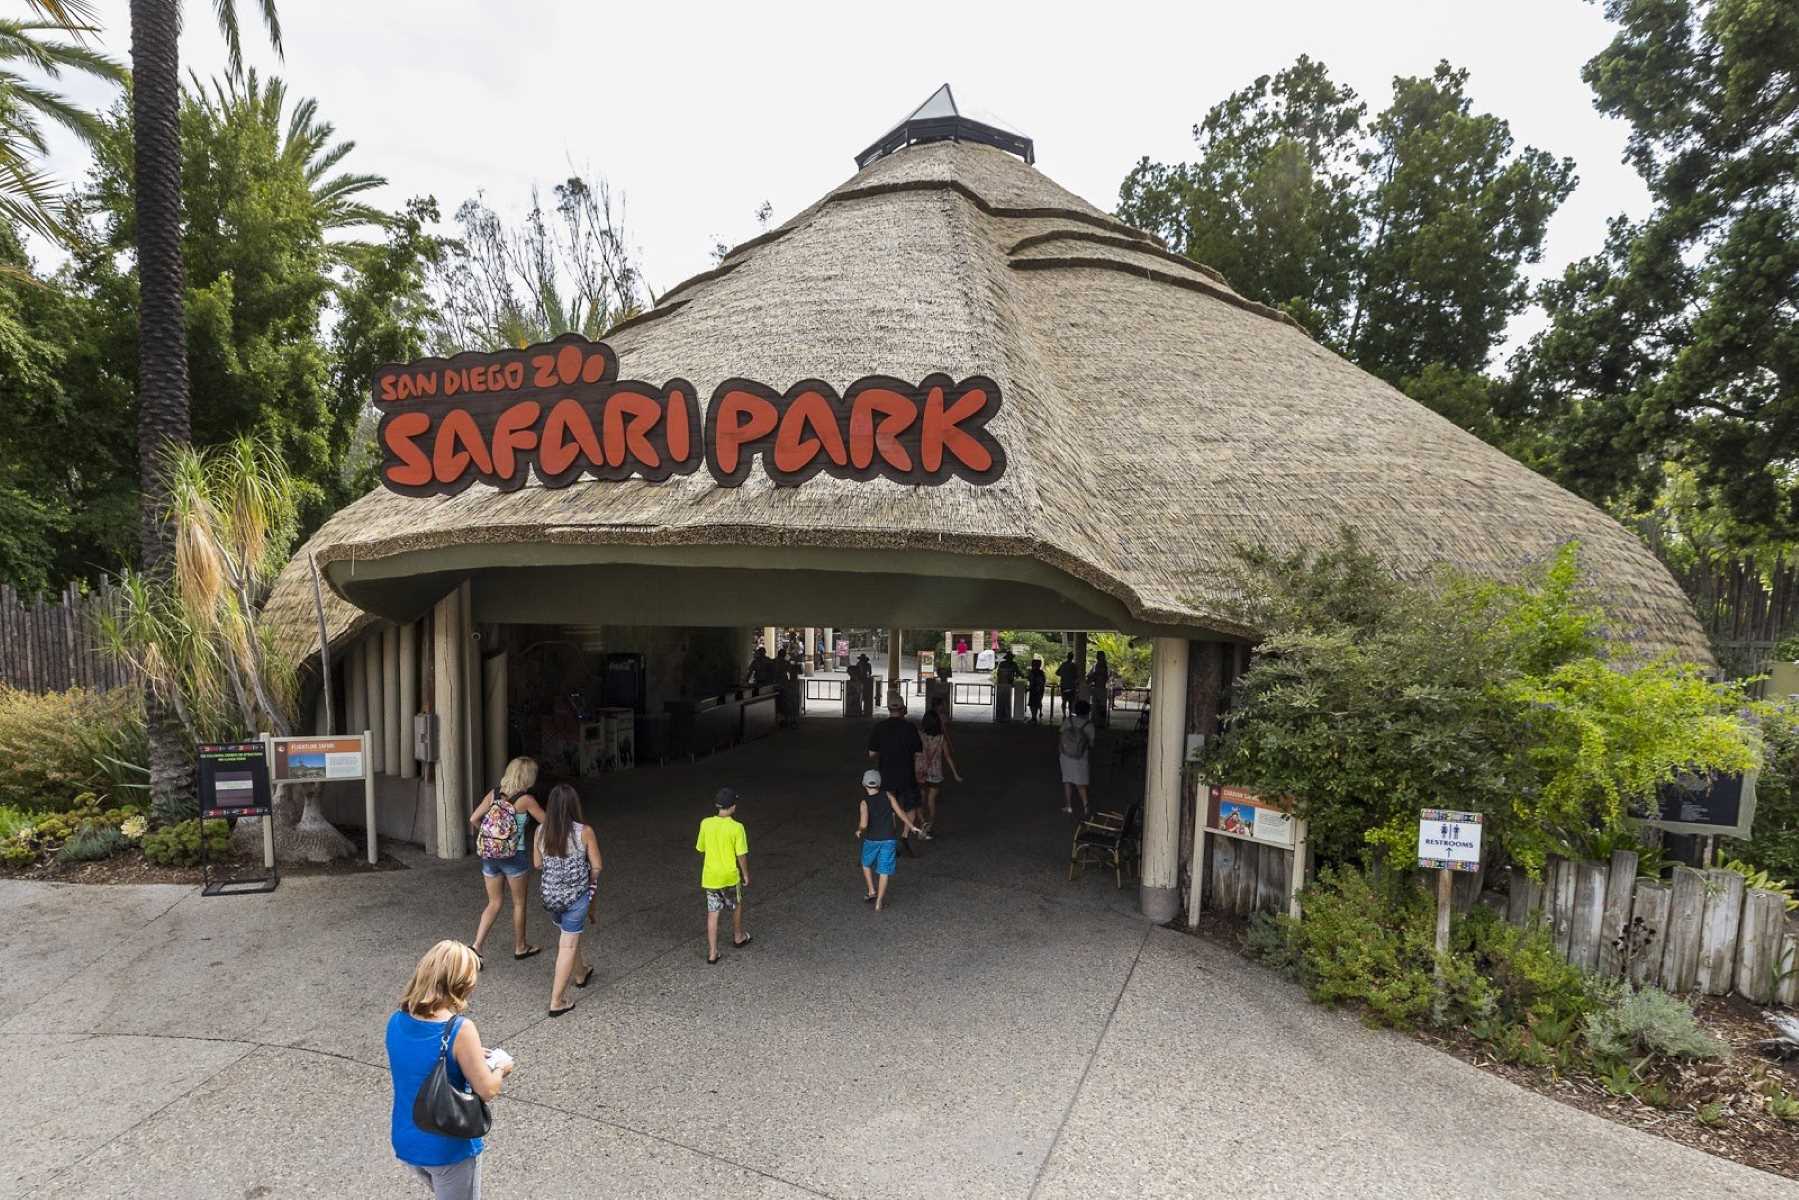 20-intriguing-facts-about-san-diego-zoo-safari-park